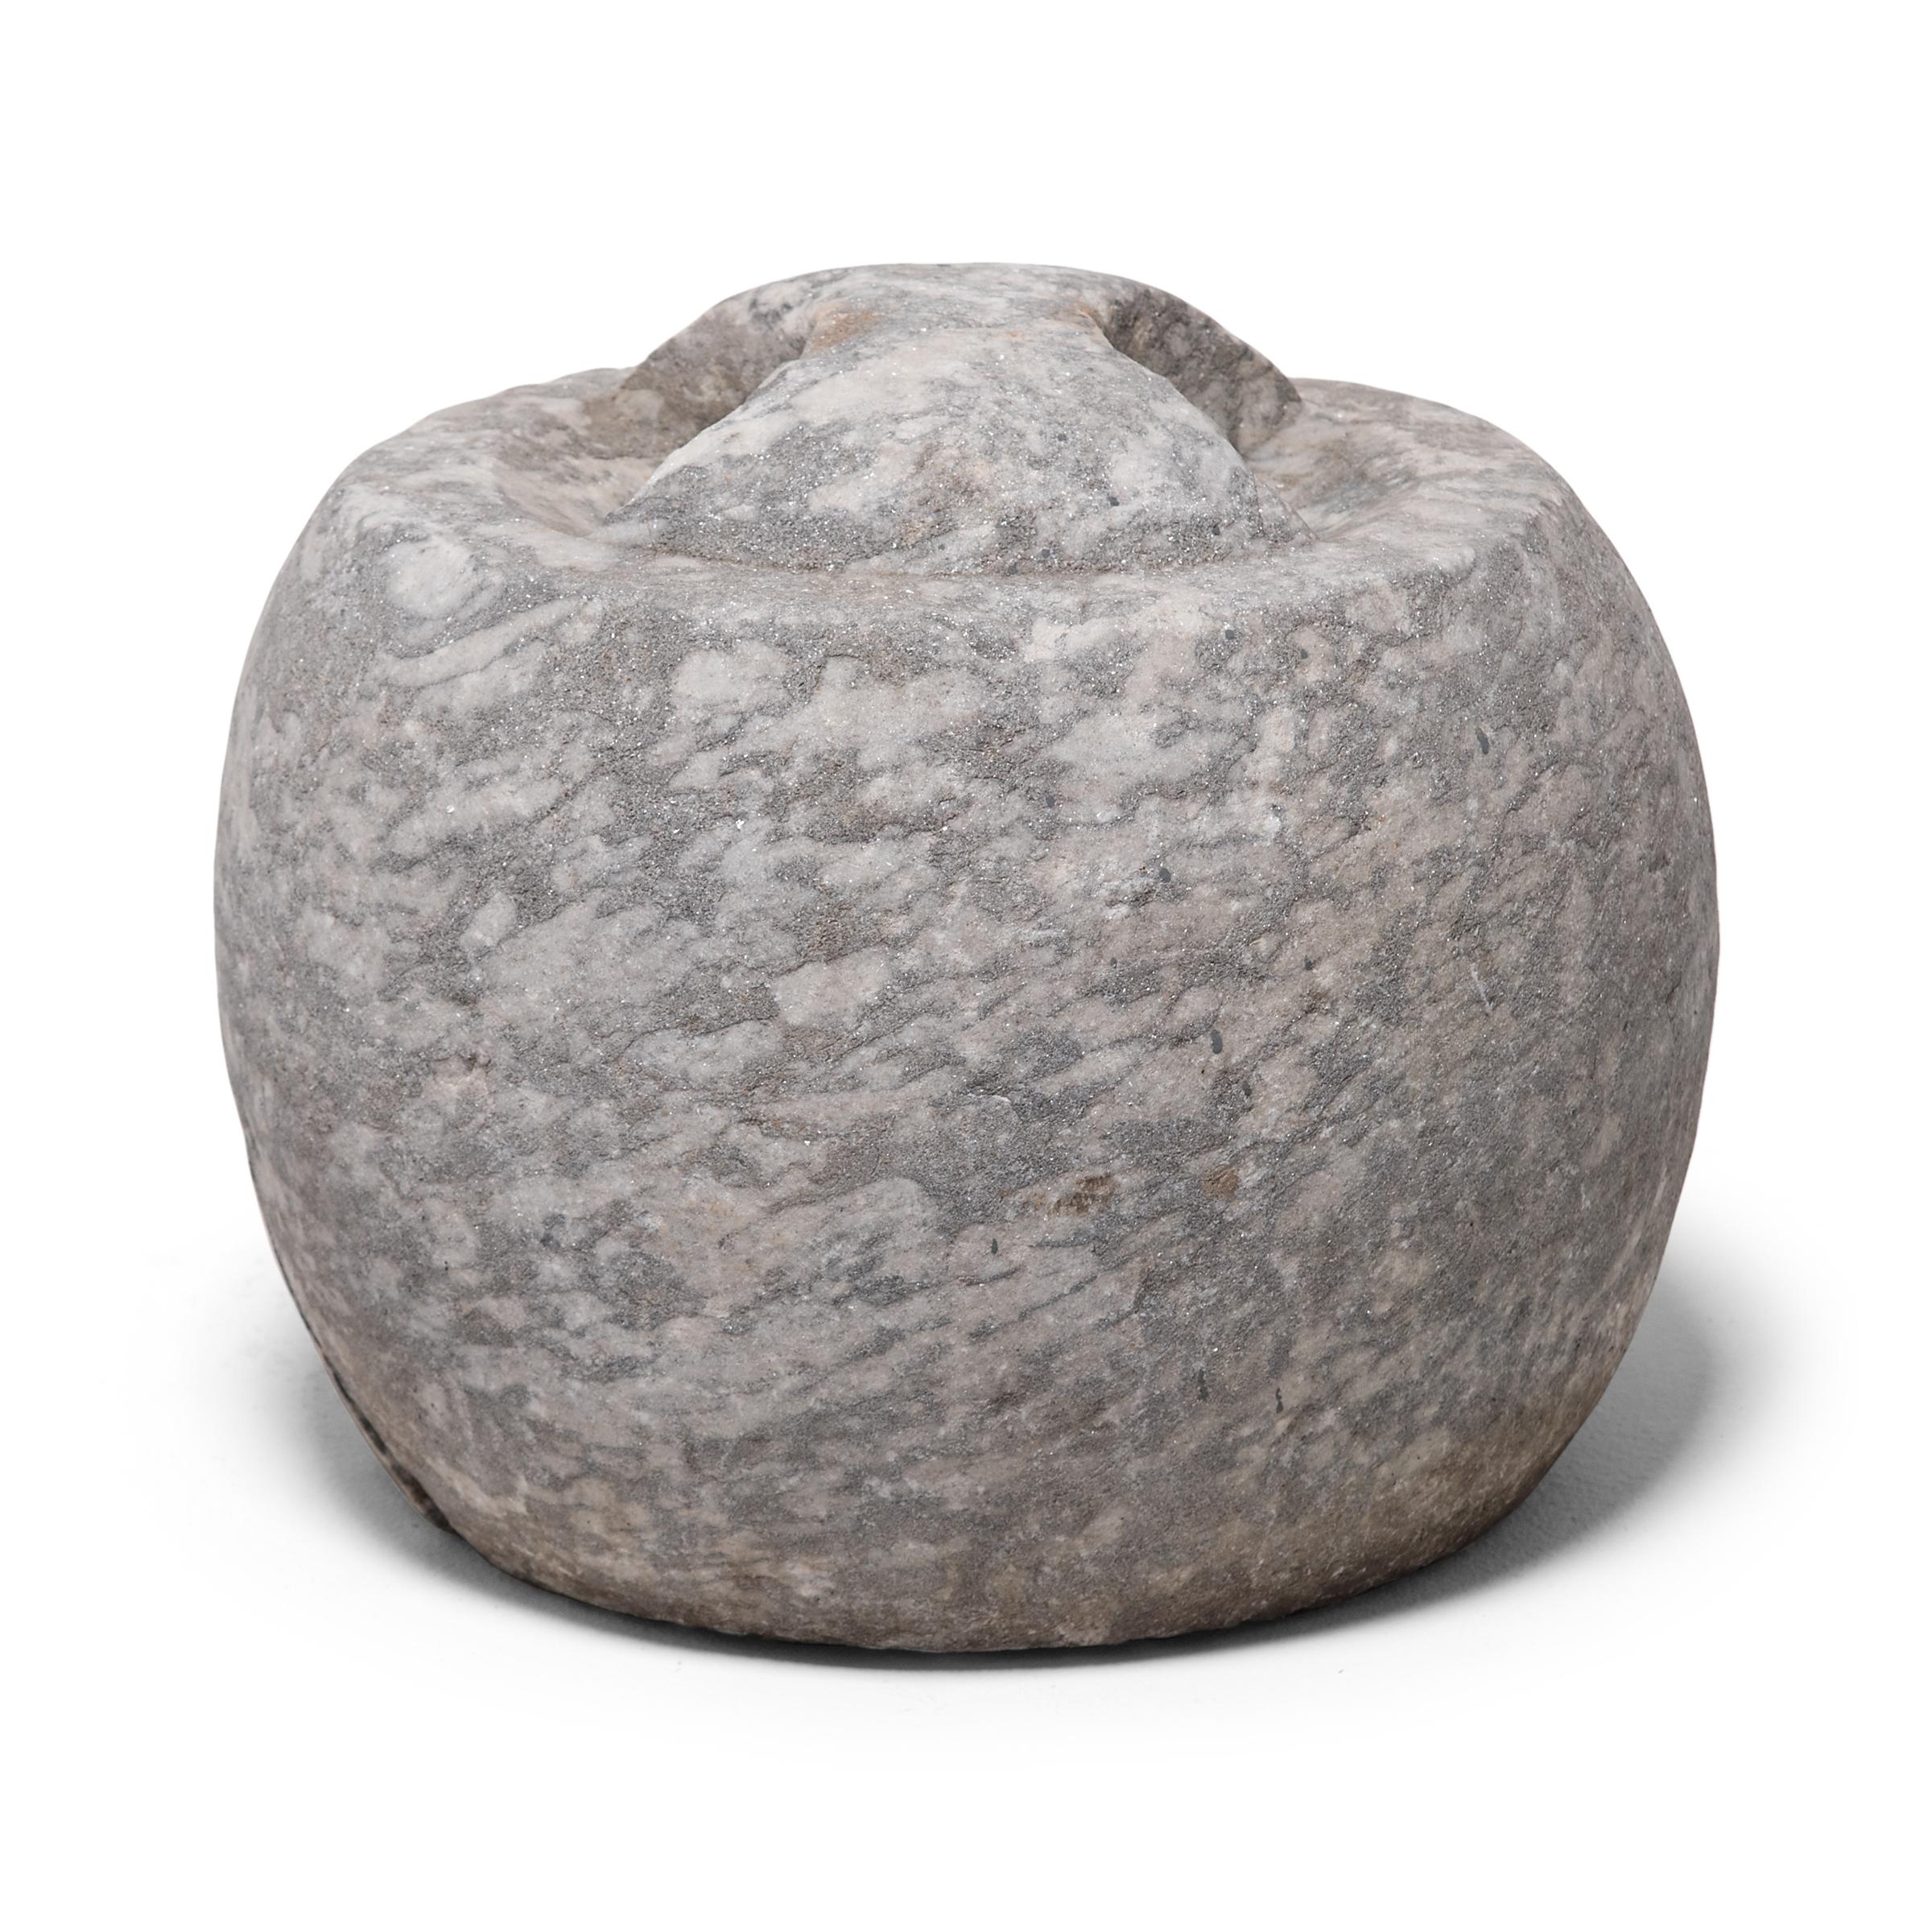 Unlike many objects of its kind, this limestone hitching stone was carved into a simple rounded shape without any figural references. Used to secure a horse by rope or reins, the stone would have been found outside the home of a wealthy homeowner.